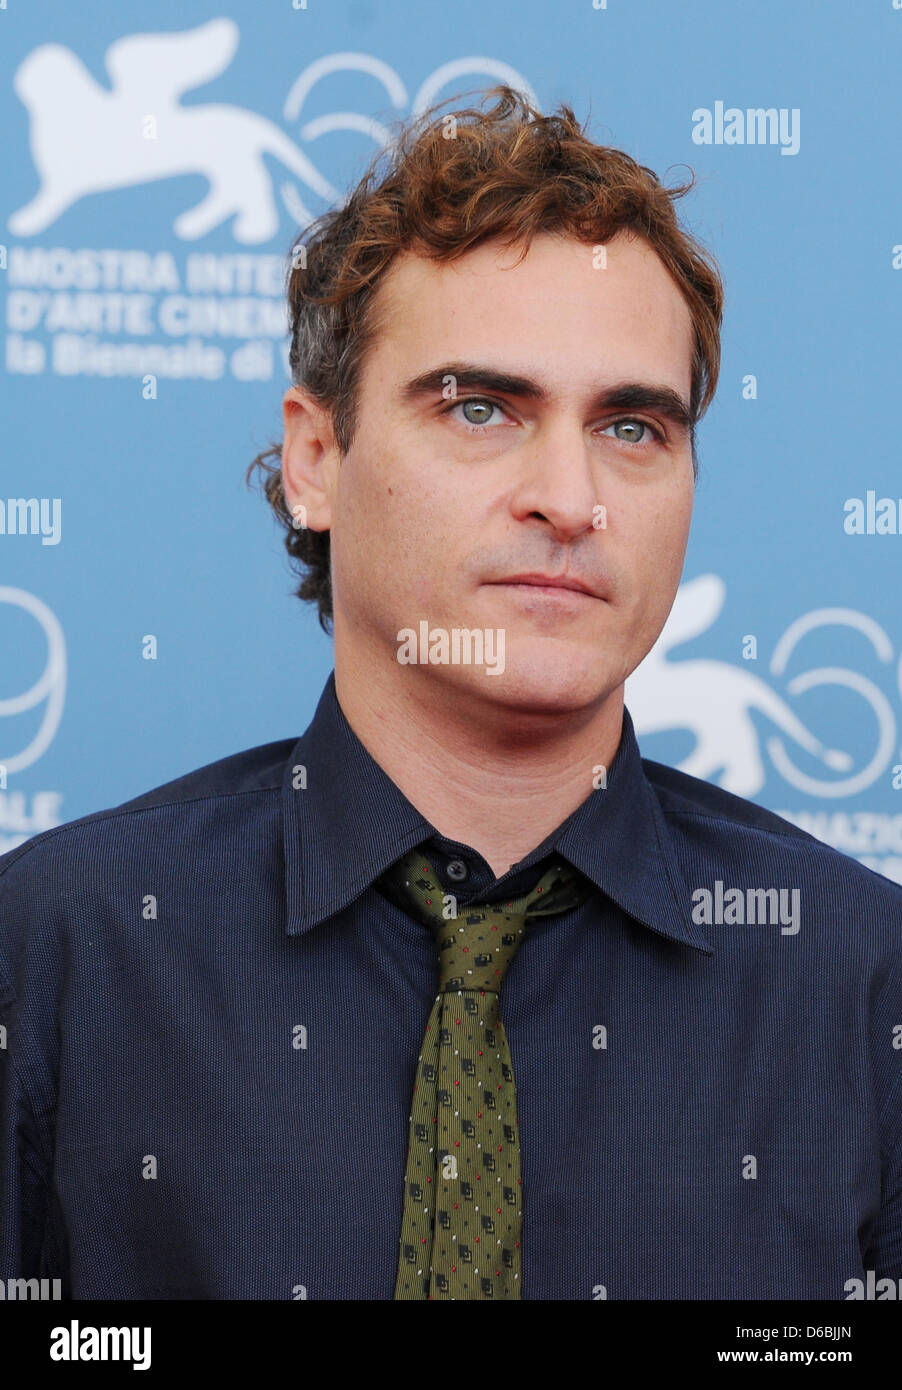 US actor Joaquin Phoenix poses during a photocall of the movie 'The Master' during the 69th Venice International Film Festival in Venice, Italy, 01 September 2012. The movie is presented in the official competition 'Venezia 69' of the festival, which runs from 29 August to 08 September. Photo: Jens Kalaene dpa Stock Photo